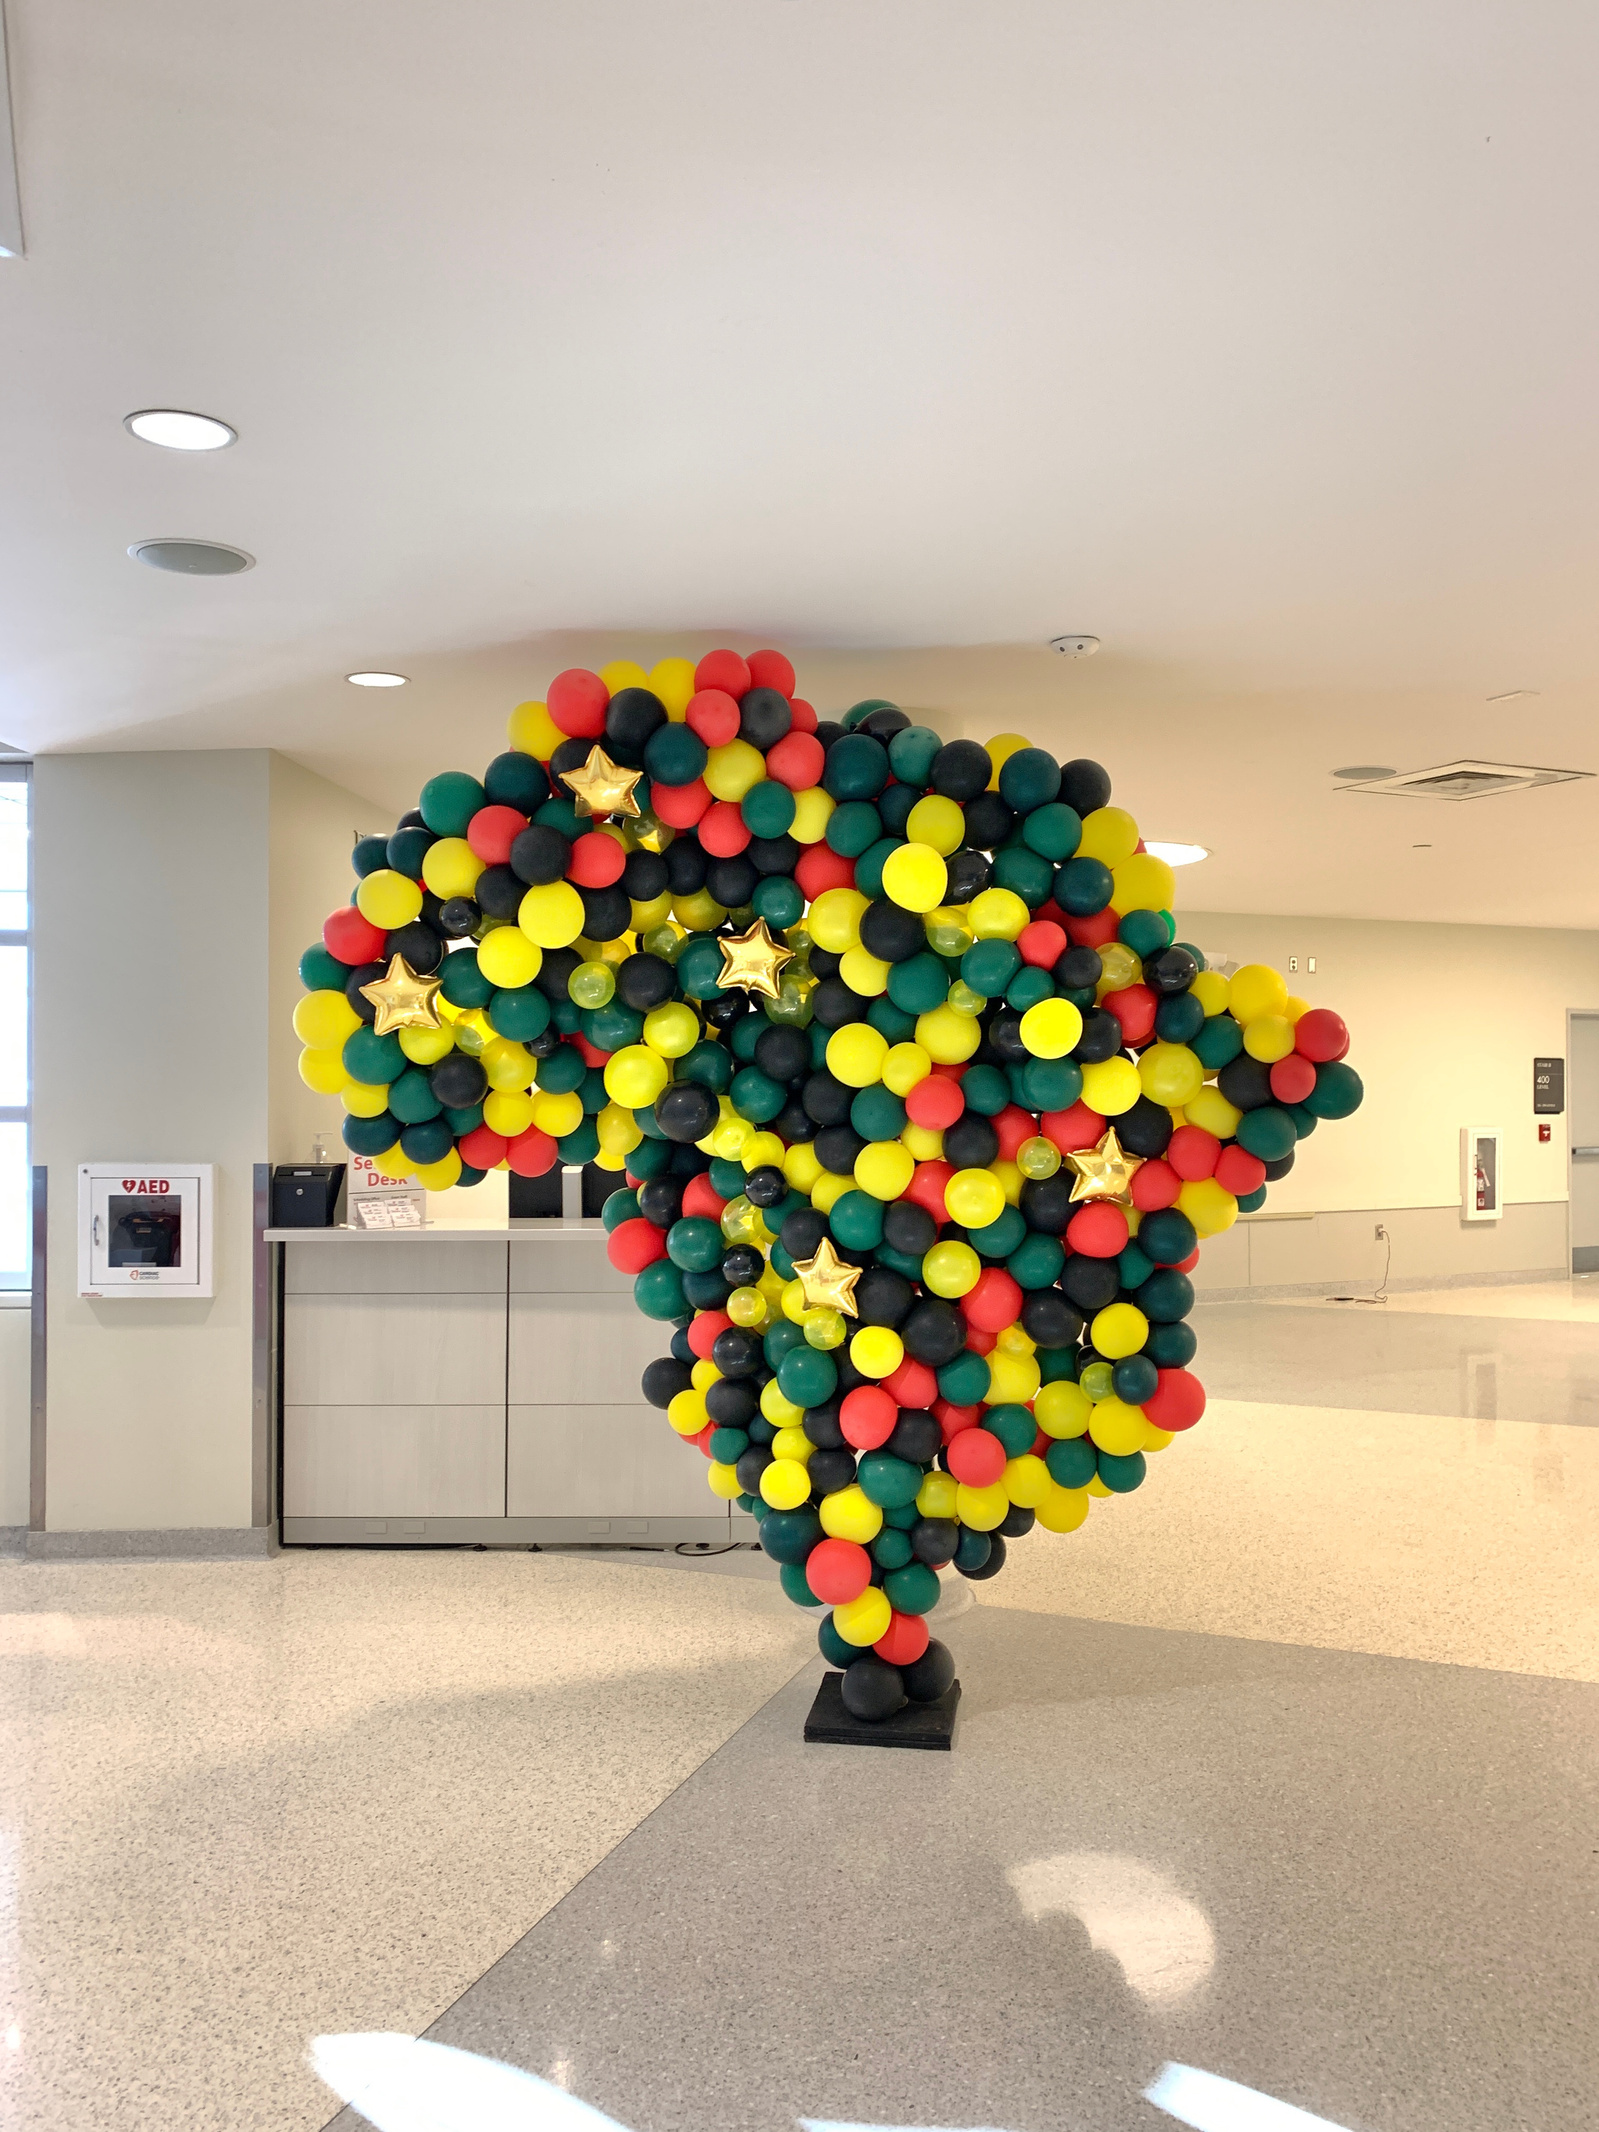 in a large white room is a large balloon sculpture in the shape of Africa in yellow black green and red balloons